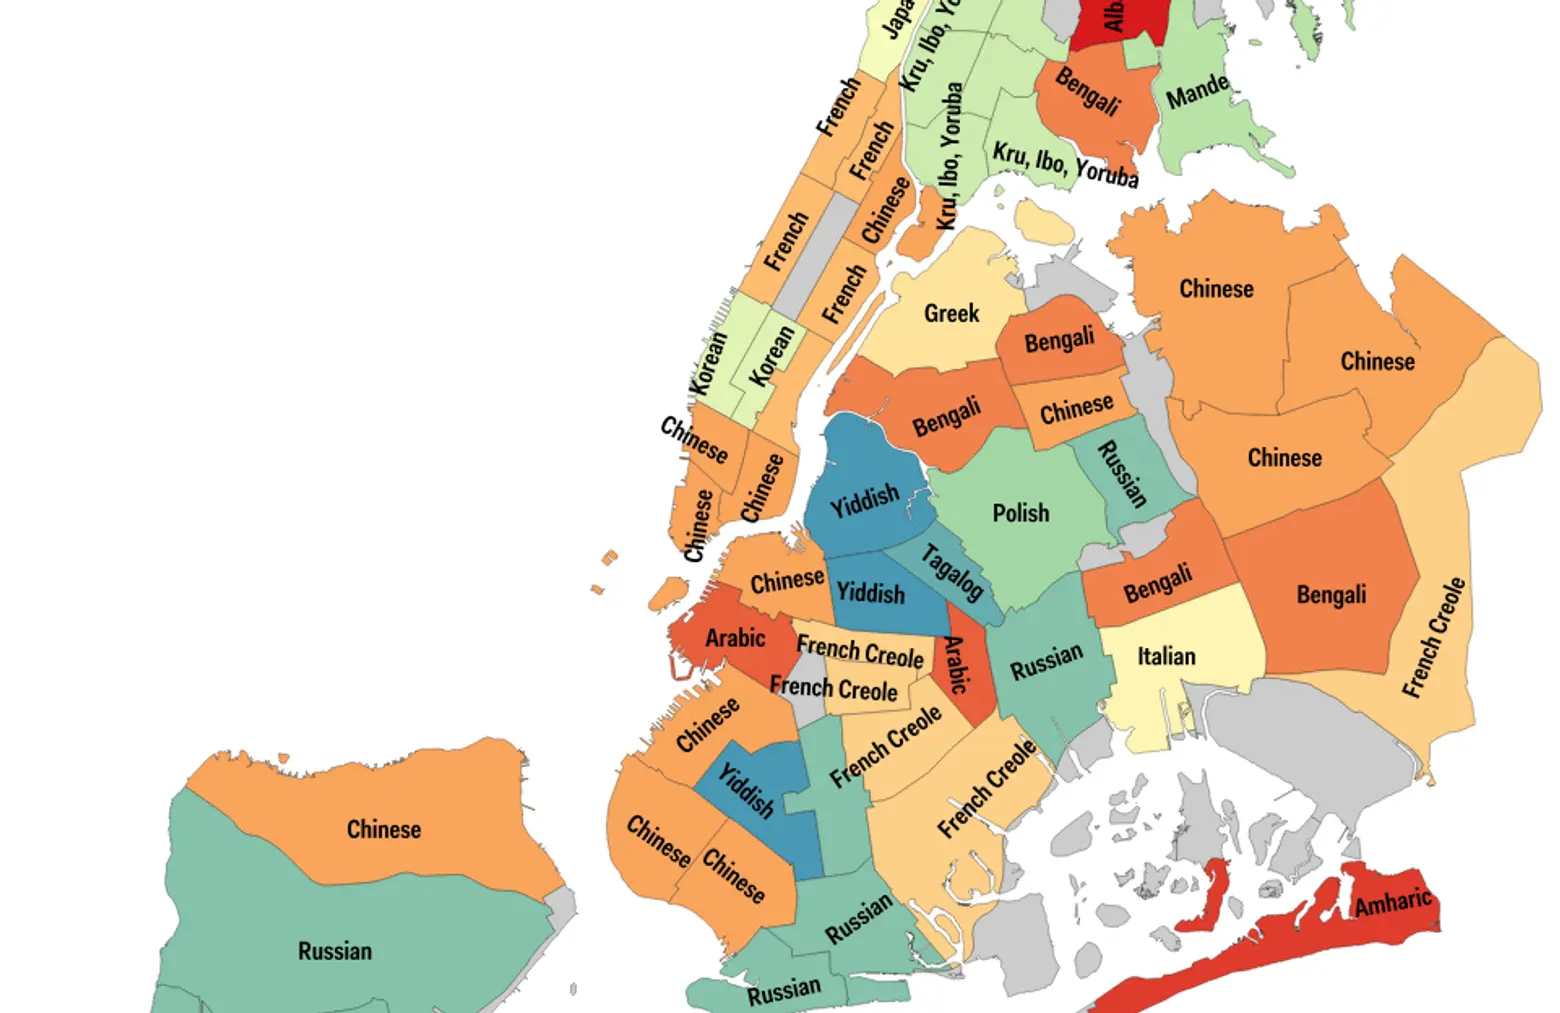 Daily Link Fix: Map of the Languages Spoken in the City; The History of the Billboard Next to Macy’s